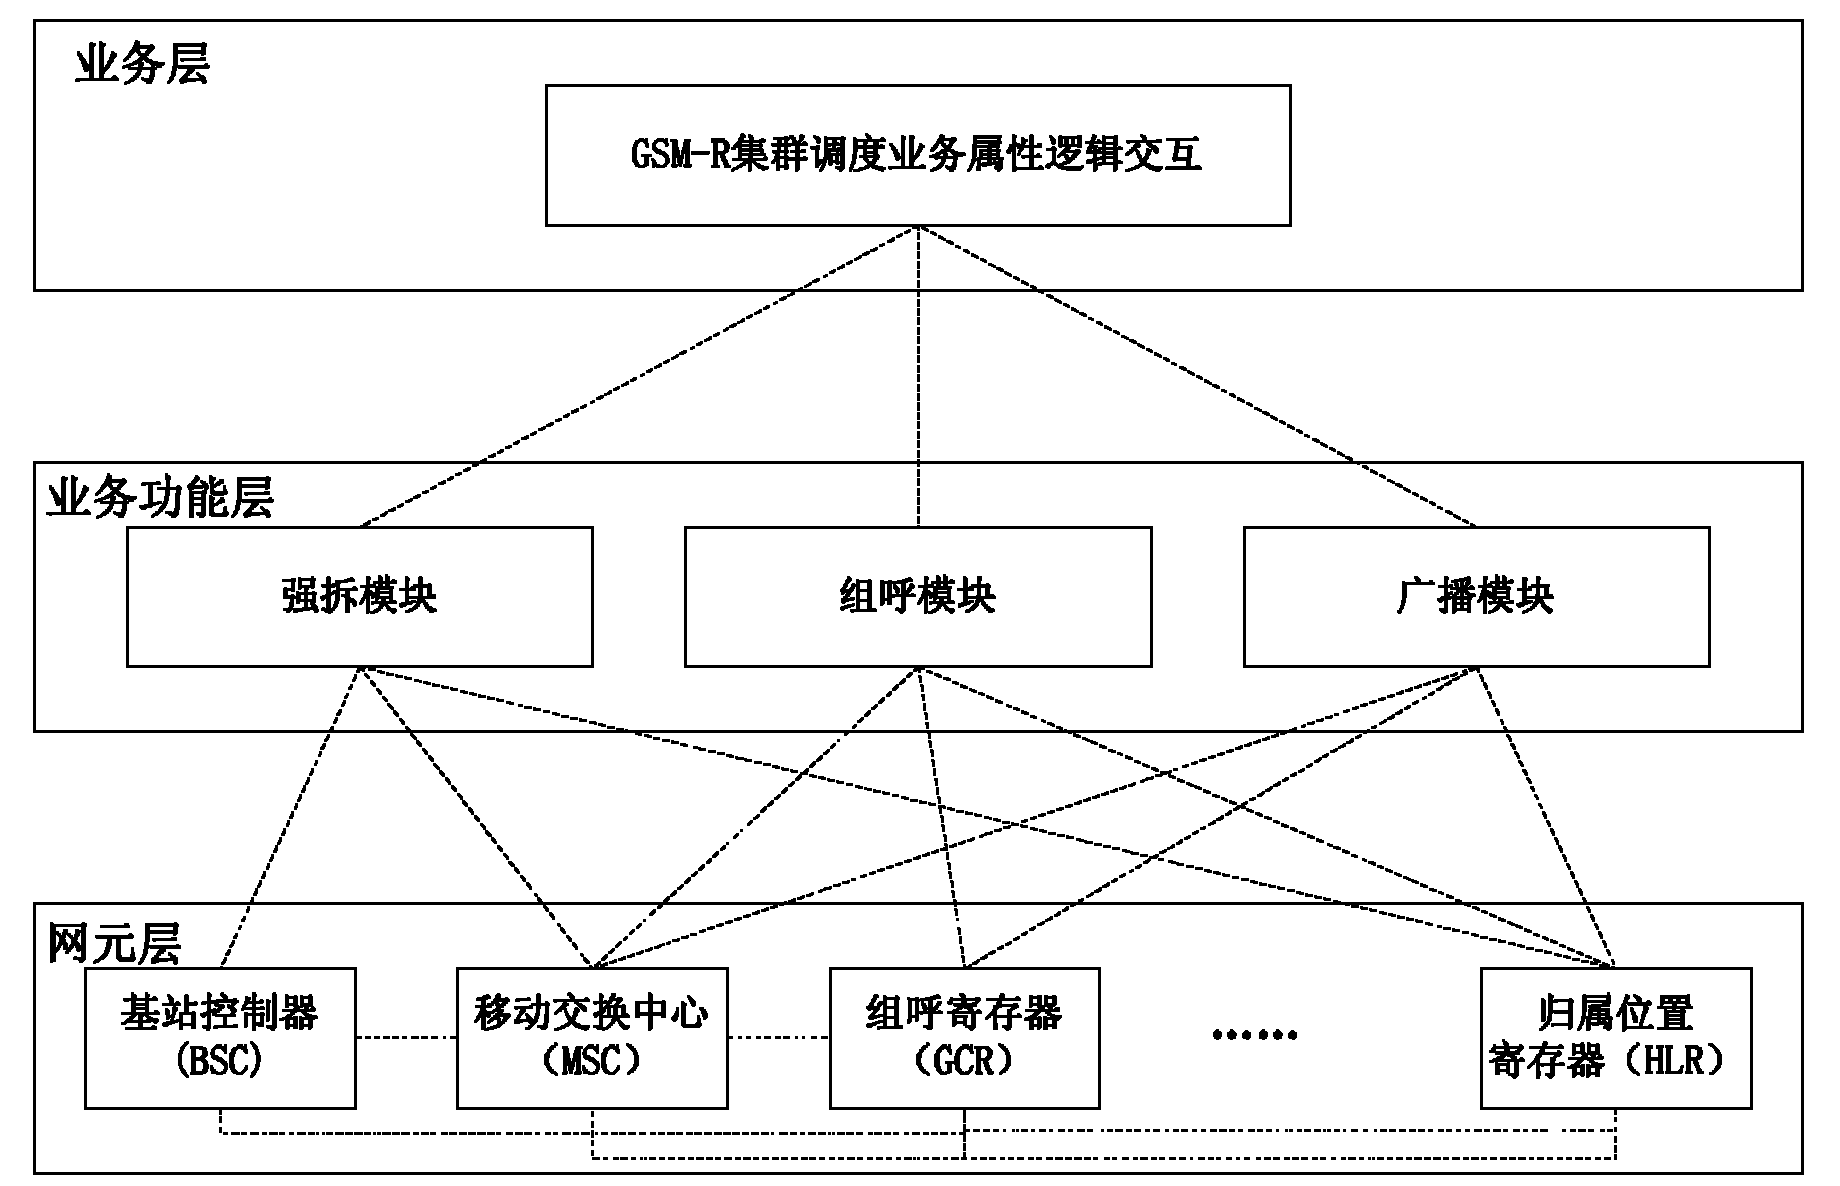 GSM-R (Global System for Mobile Communications-Railway) cluster scheduling service analysis system and implementing method thereof